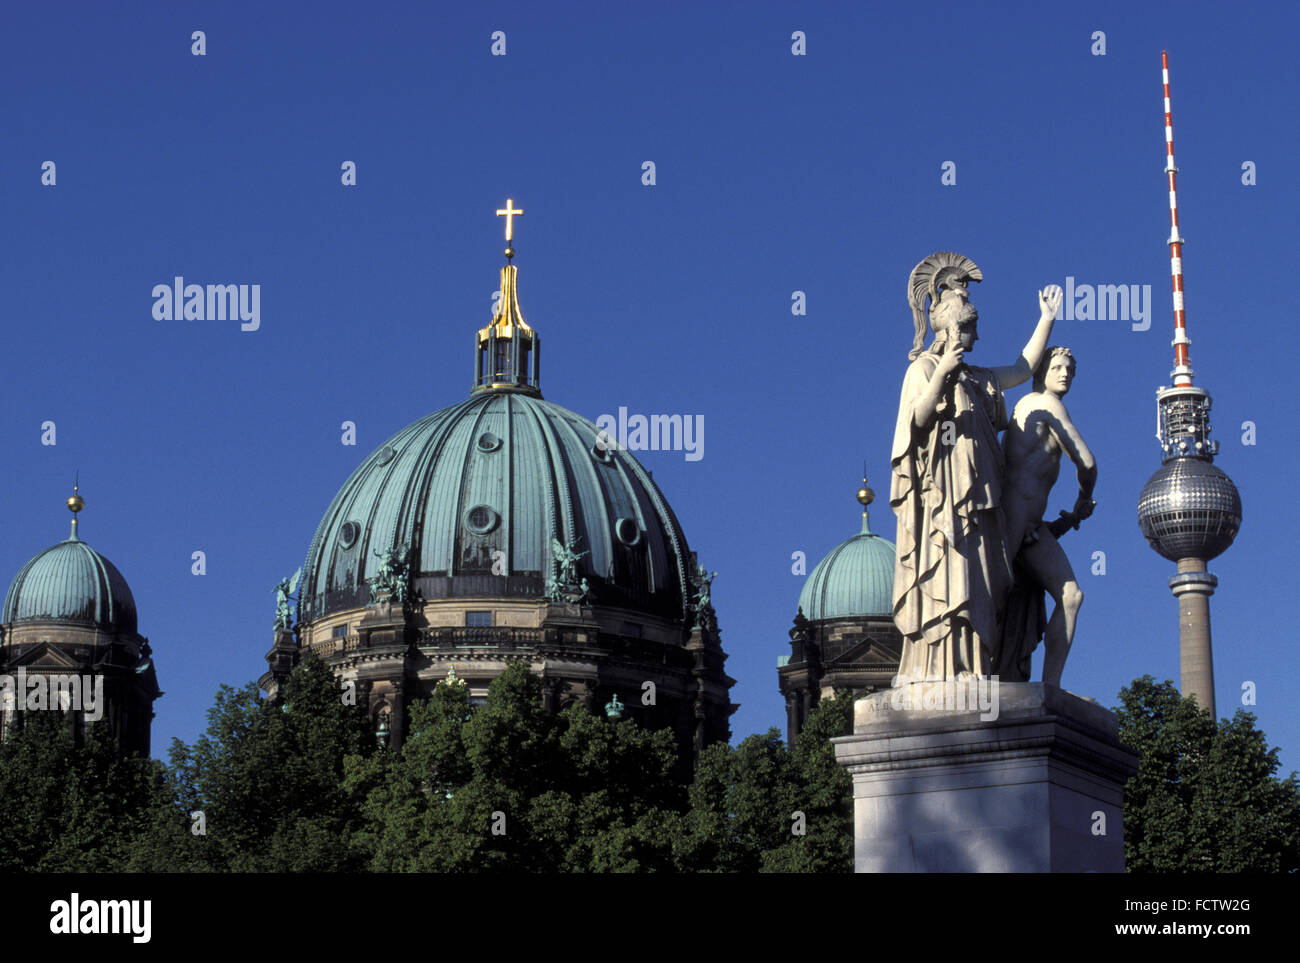 DEU, Germany, Berlin, the old Berlin Cathedral, statue at the Castle Bridge, television tower at the Alexander square.  DEU, Deu Stock Photo